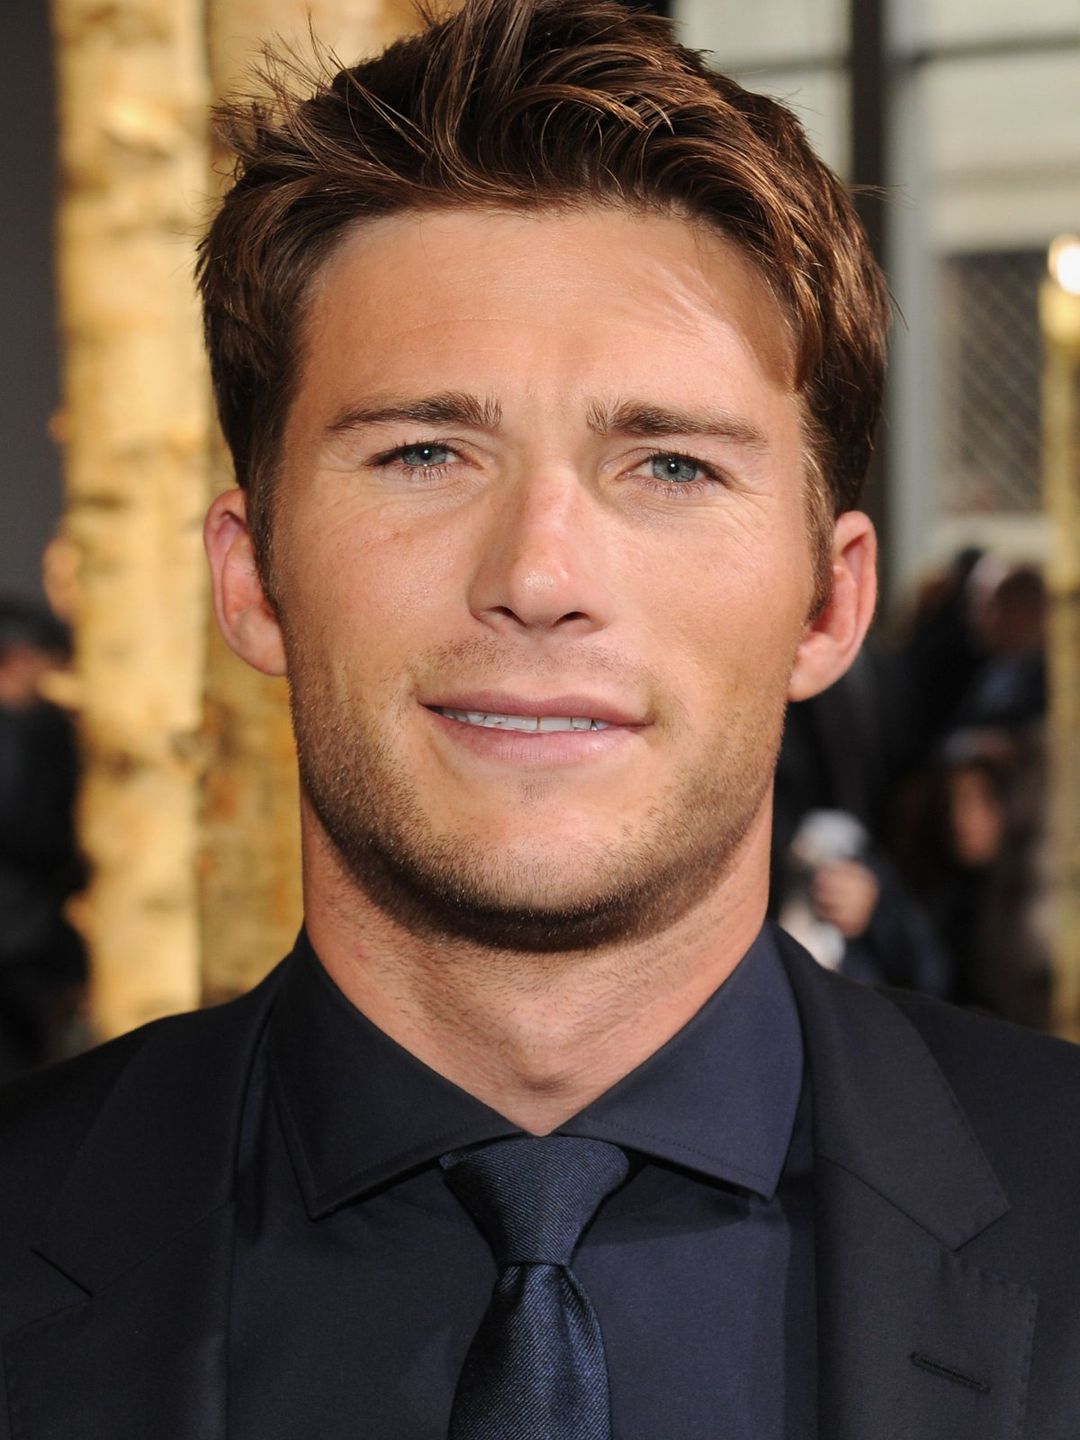 Scott Eastwood who are his parents